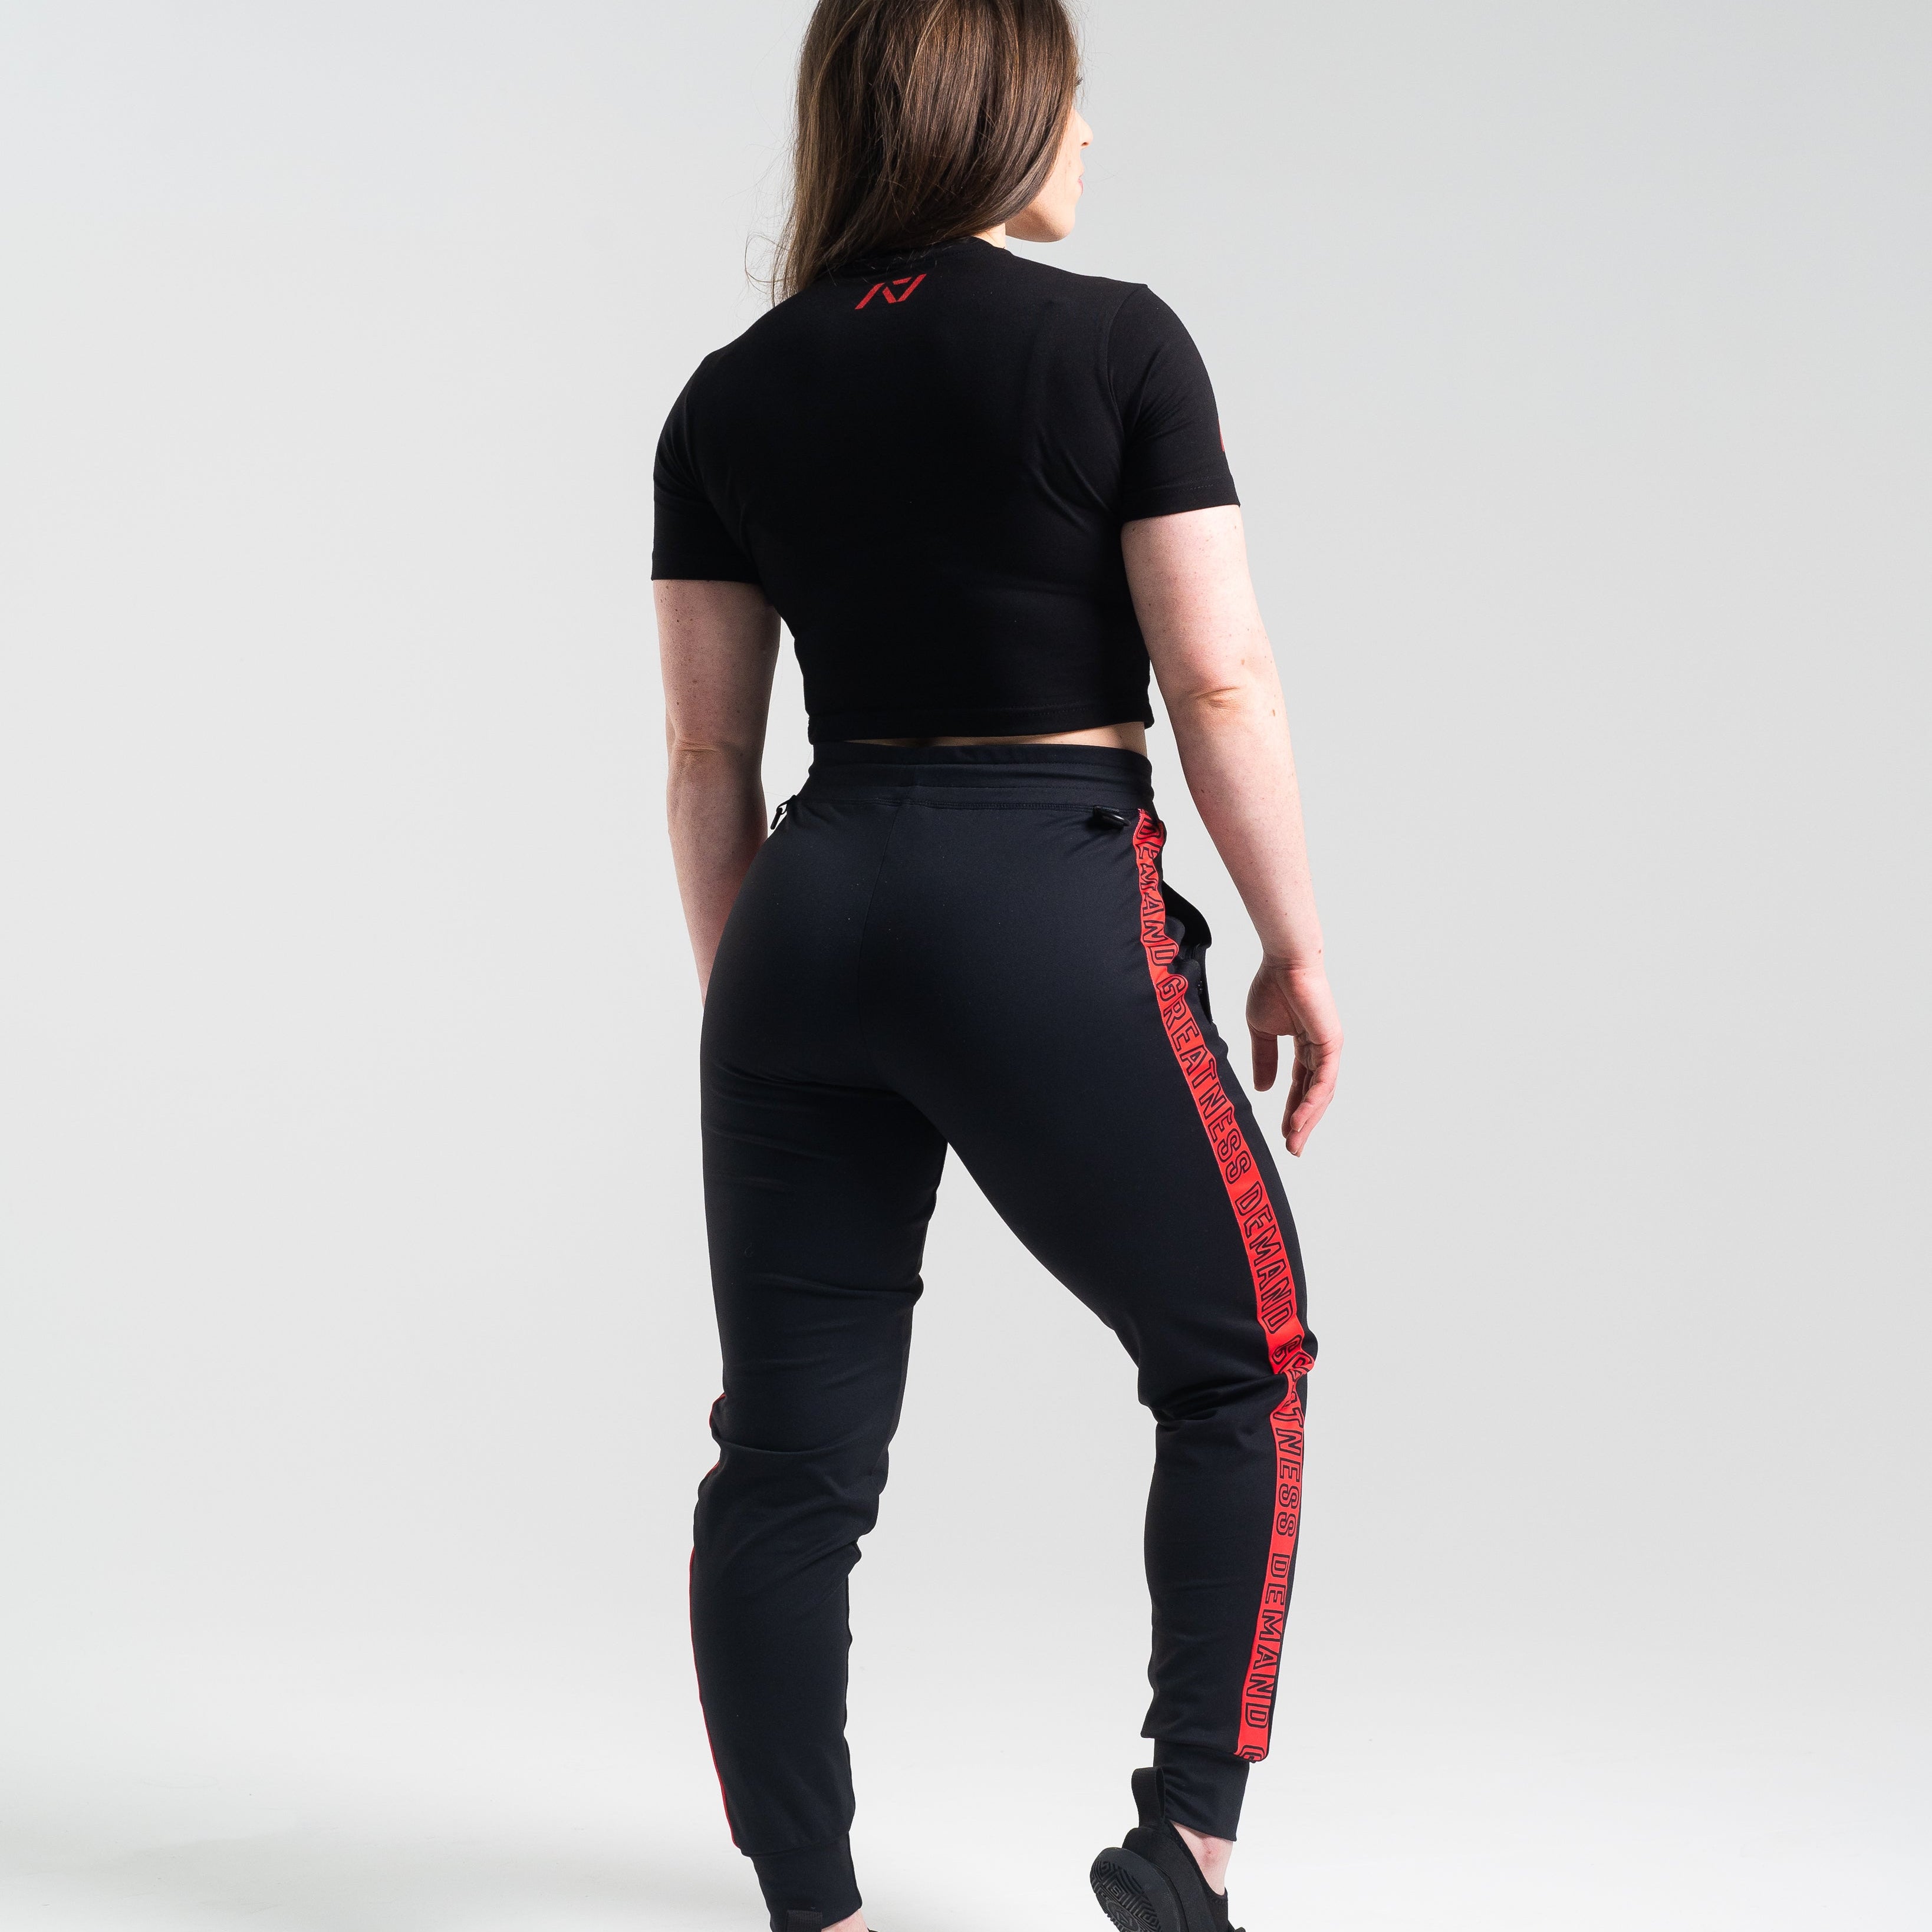 A7 Red Dawn Defy joggers are just as comfortable in the gym as they are going out. These are made with premium moisture-wicking 4-way-stretch material for greater range of motion. These are a great fit for both men and women. All A7 Powerlifting Equipment shipping to France, Spain, Ireland, Germany, Italy, Sweden and EU. 